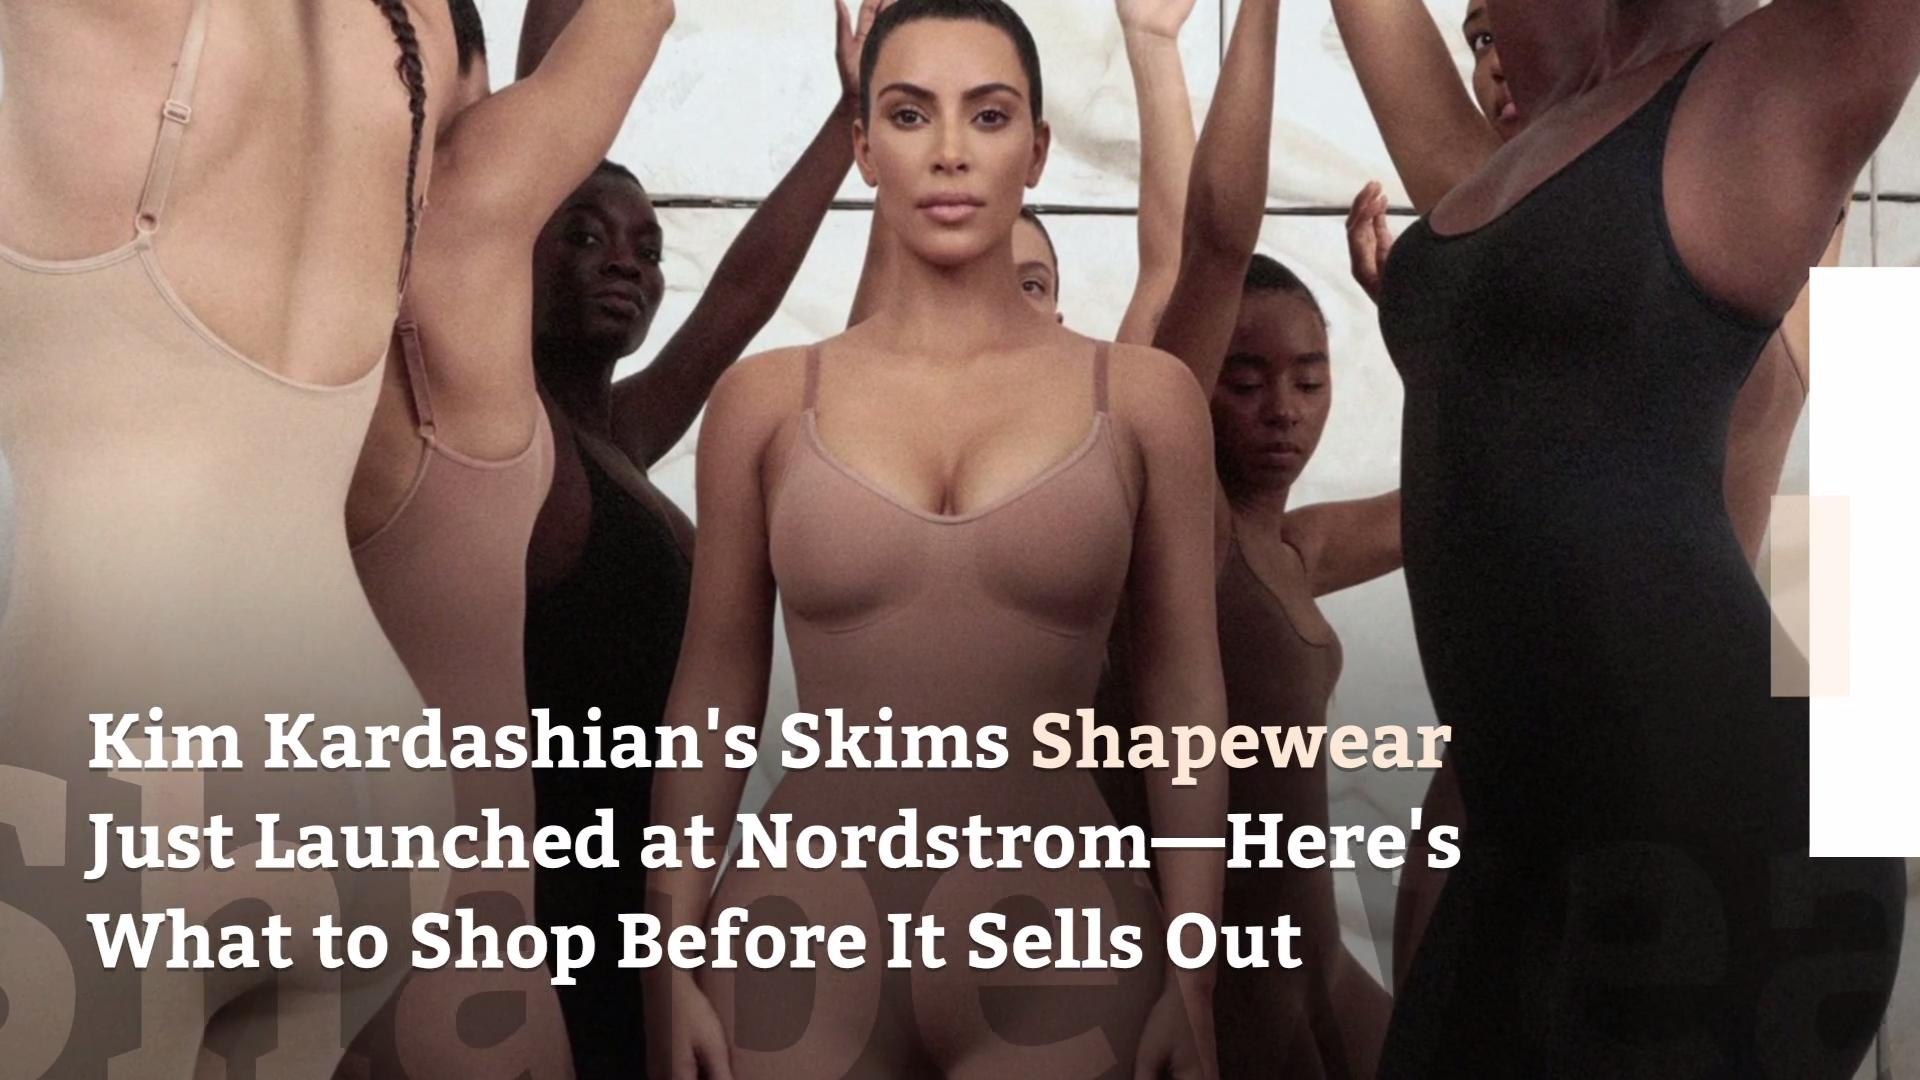 Kim Kardashian's Skims Shapewear Just Launched at Nordstrom—Here's